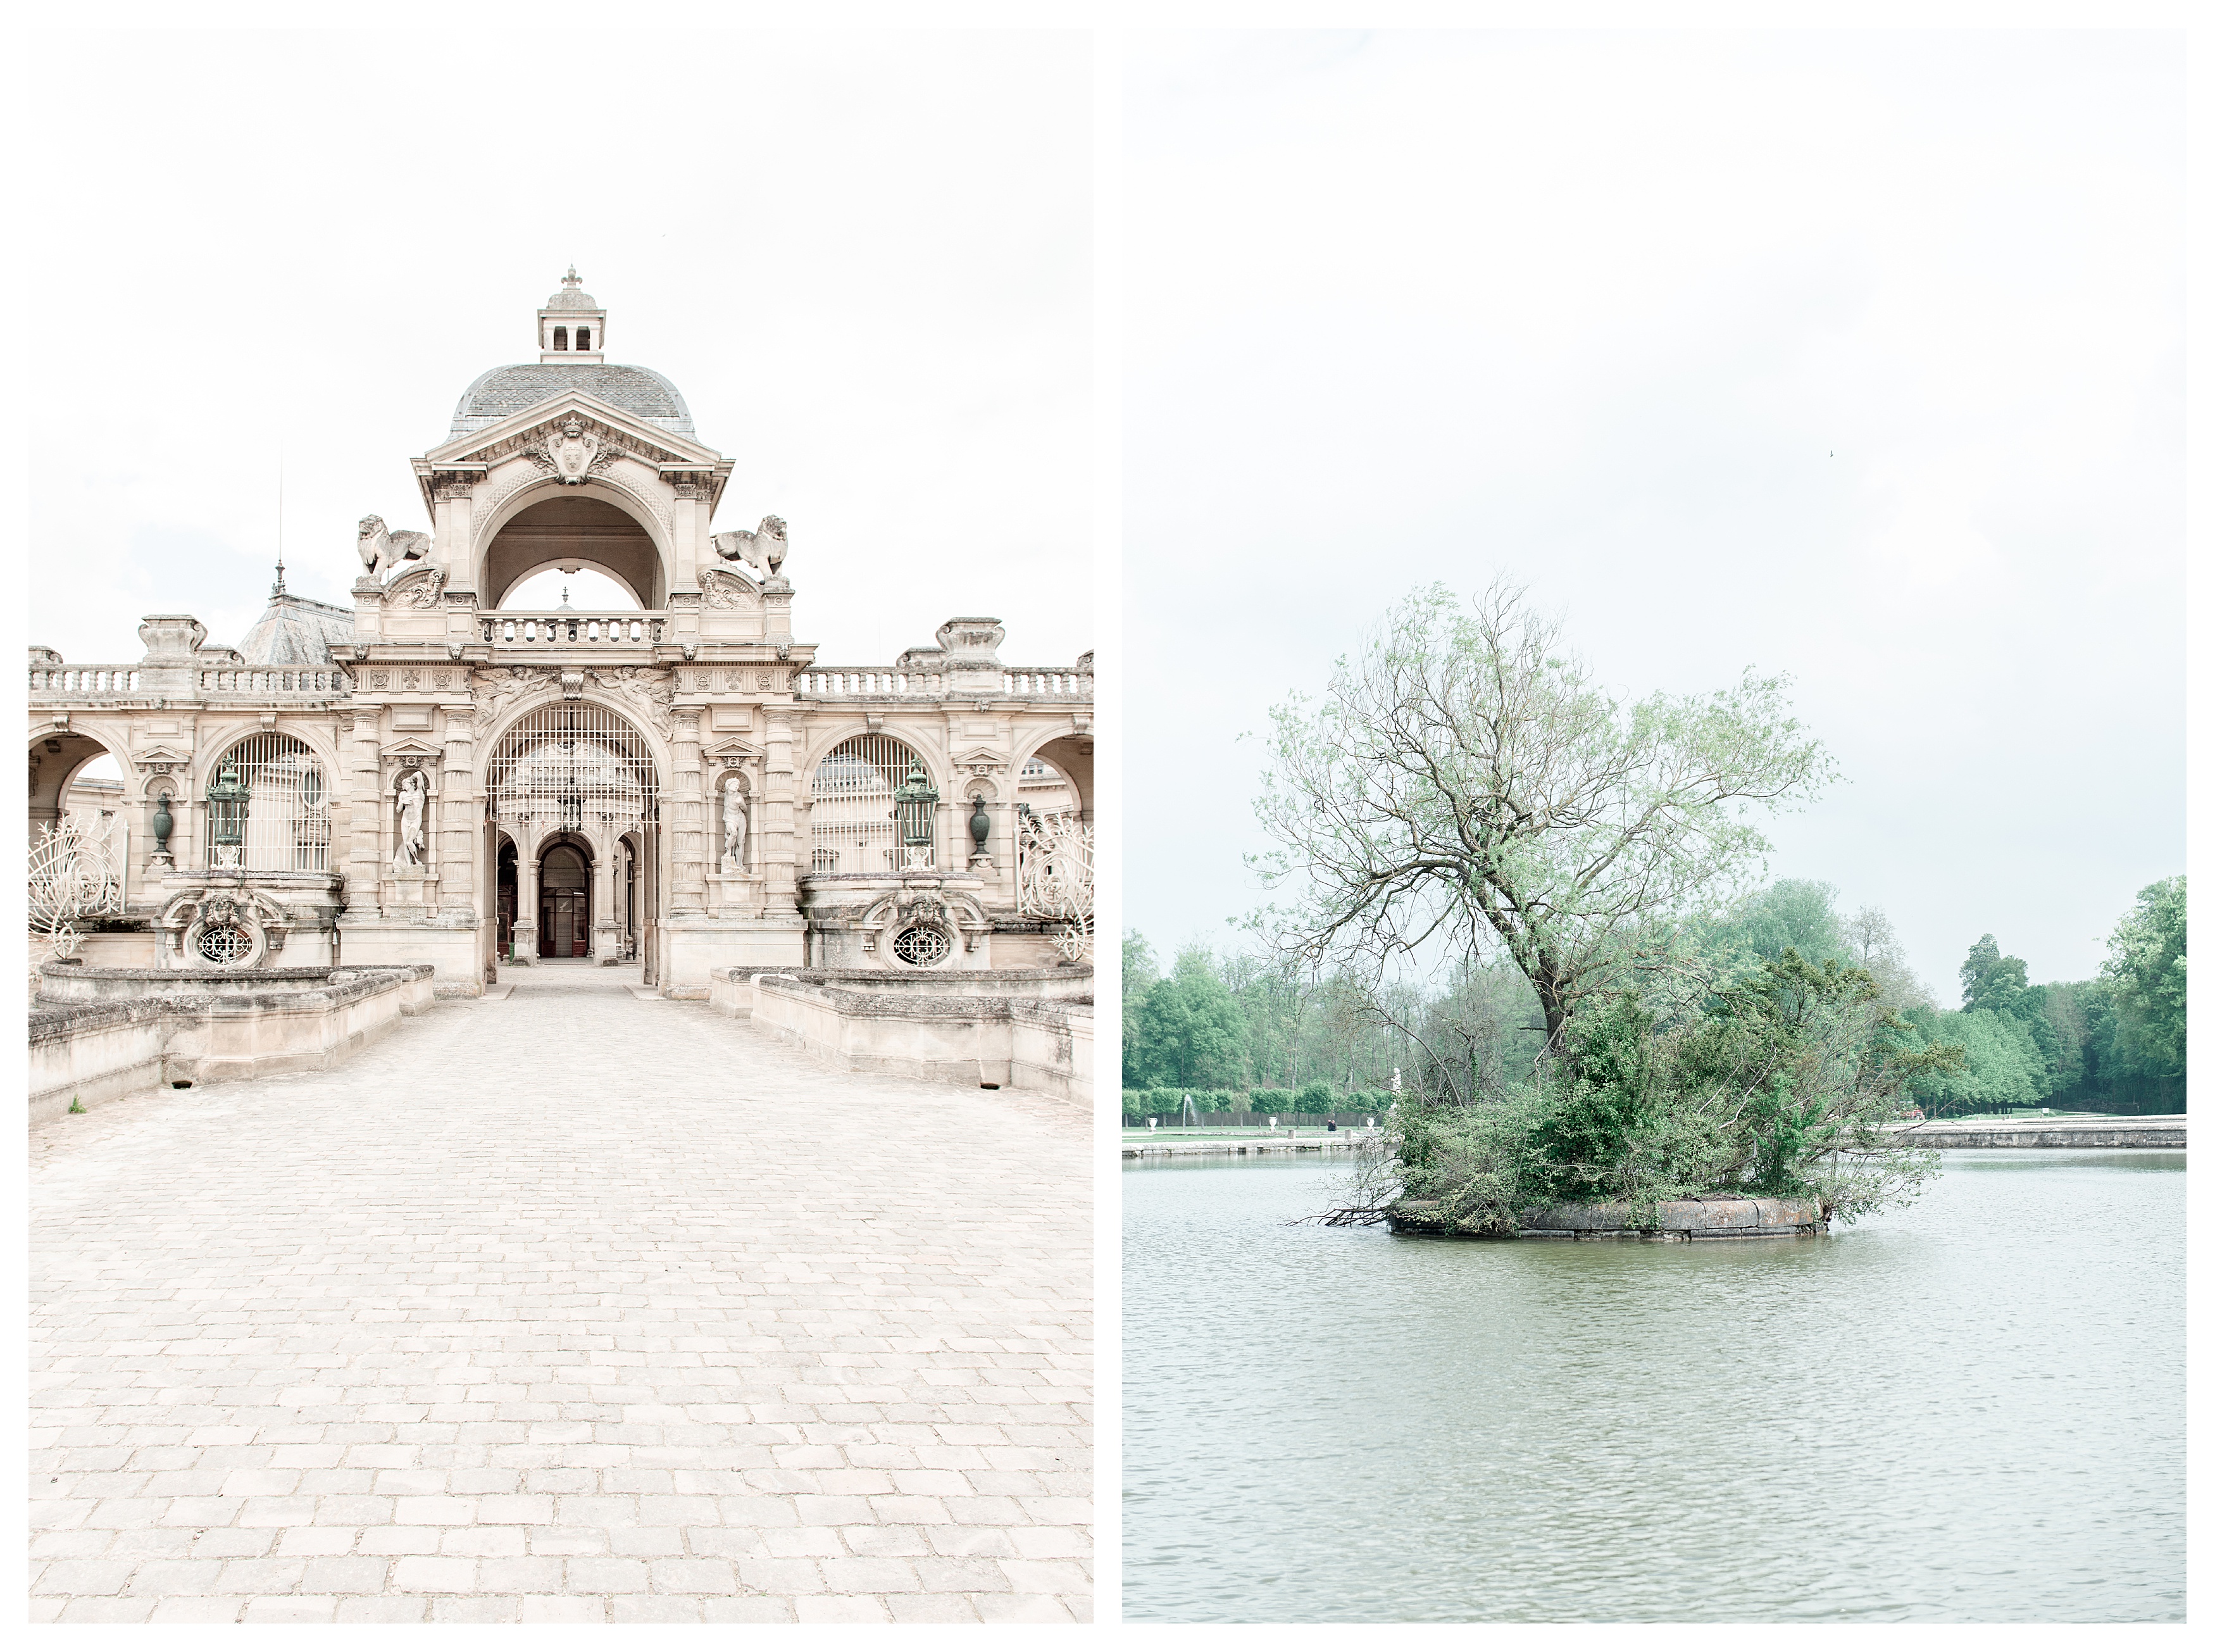 left: the entrance of the château de chantilly. right: a tree grows on a pavilion in a small lake on the property.